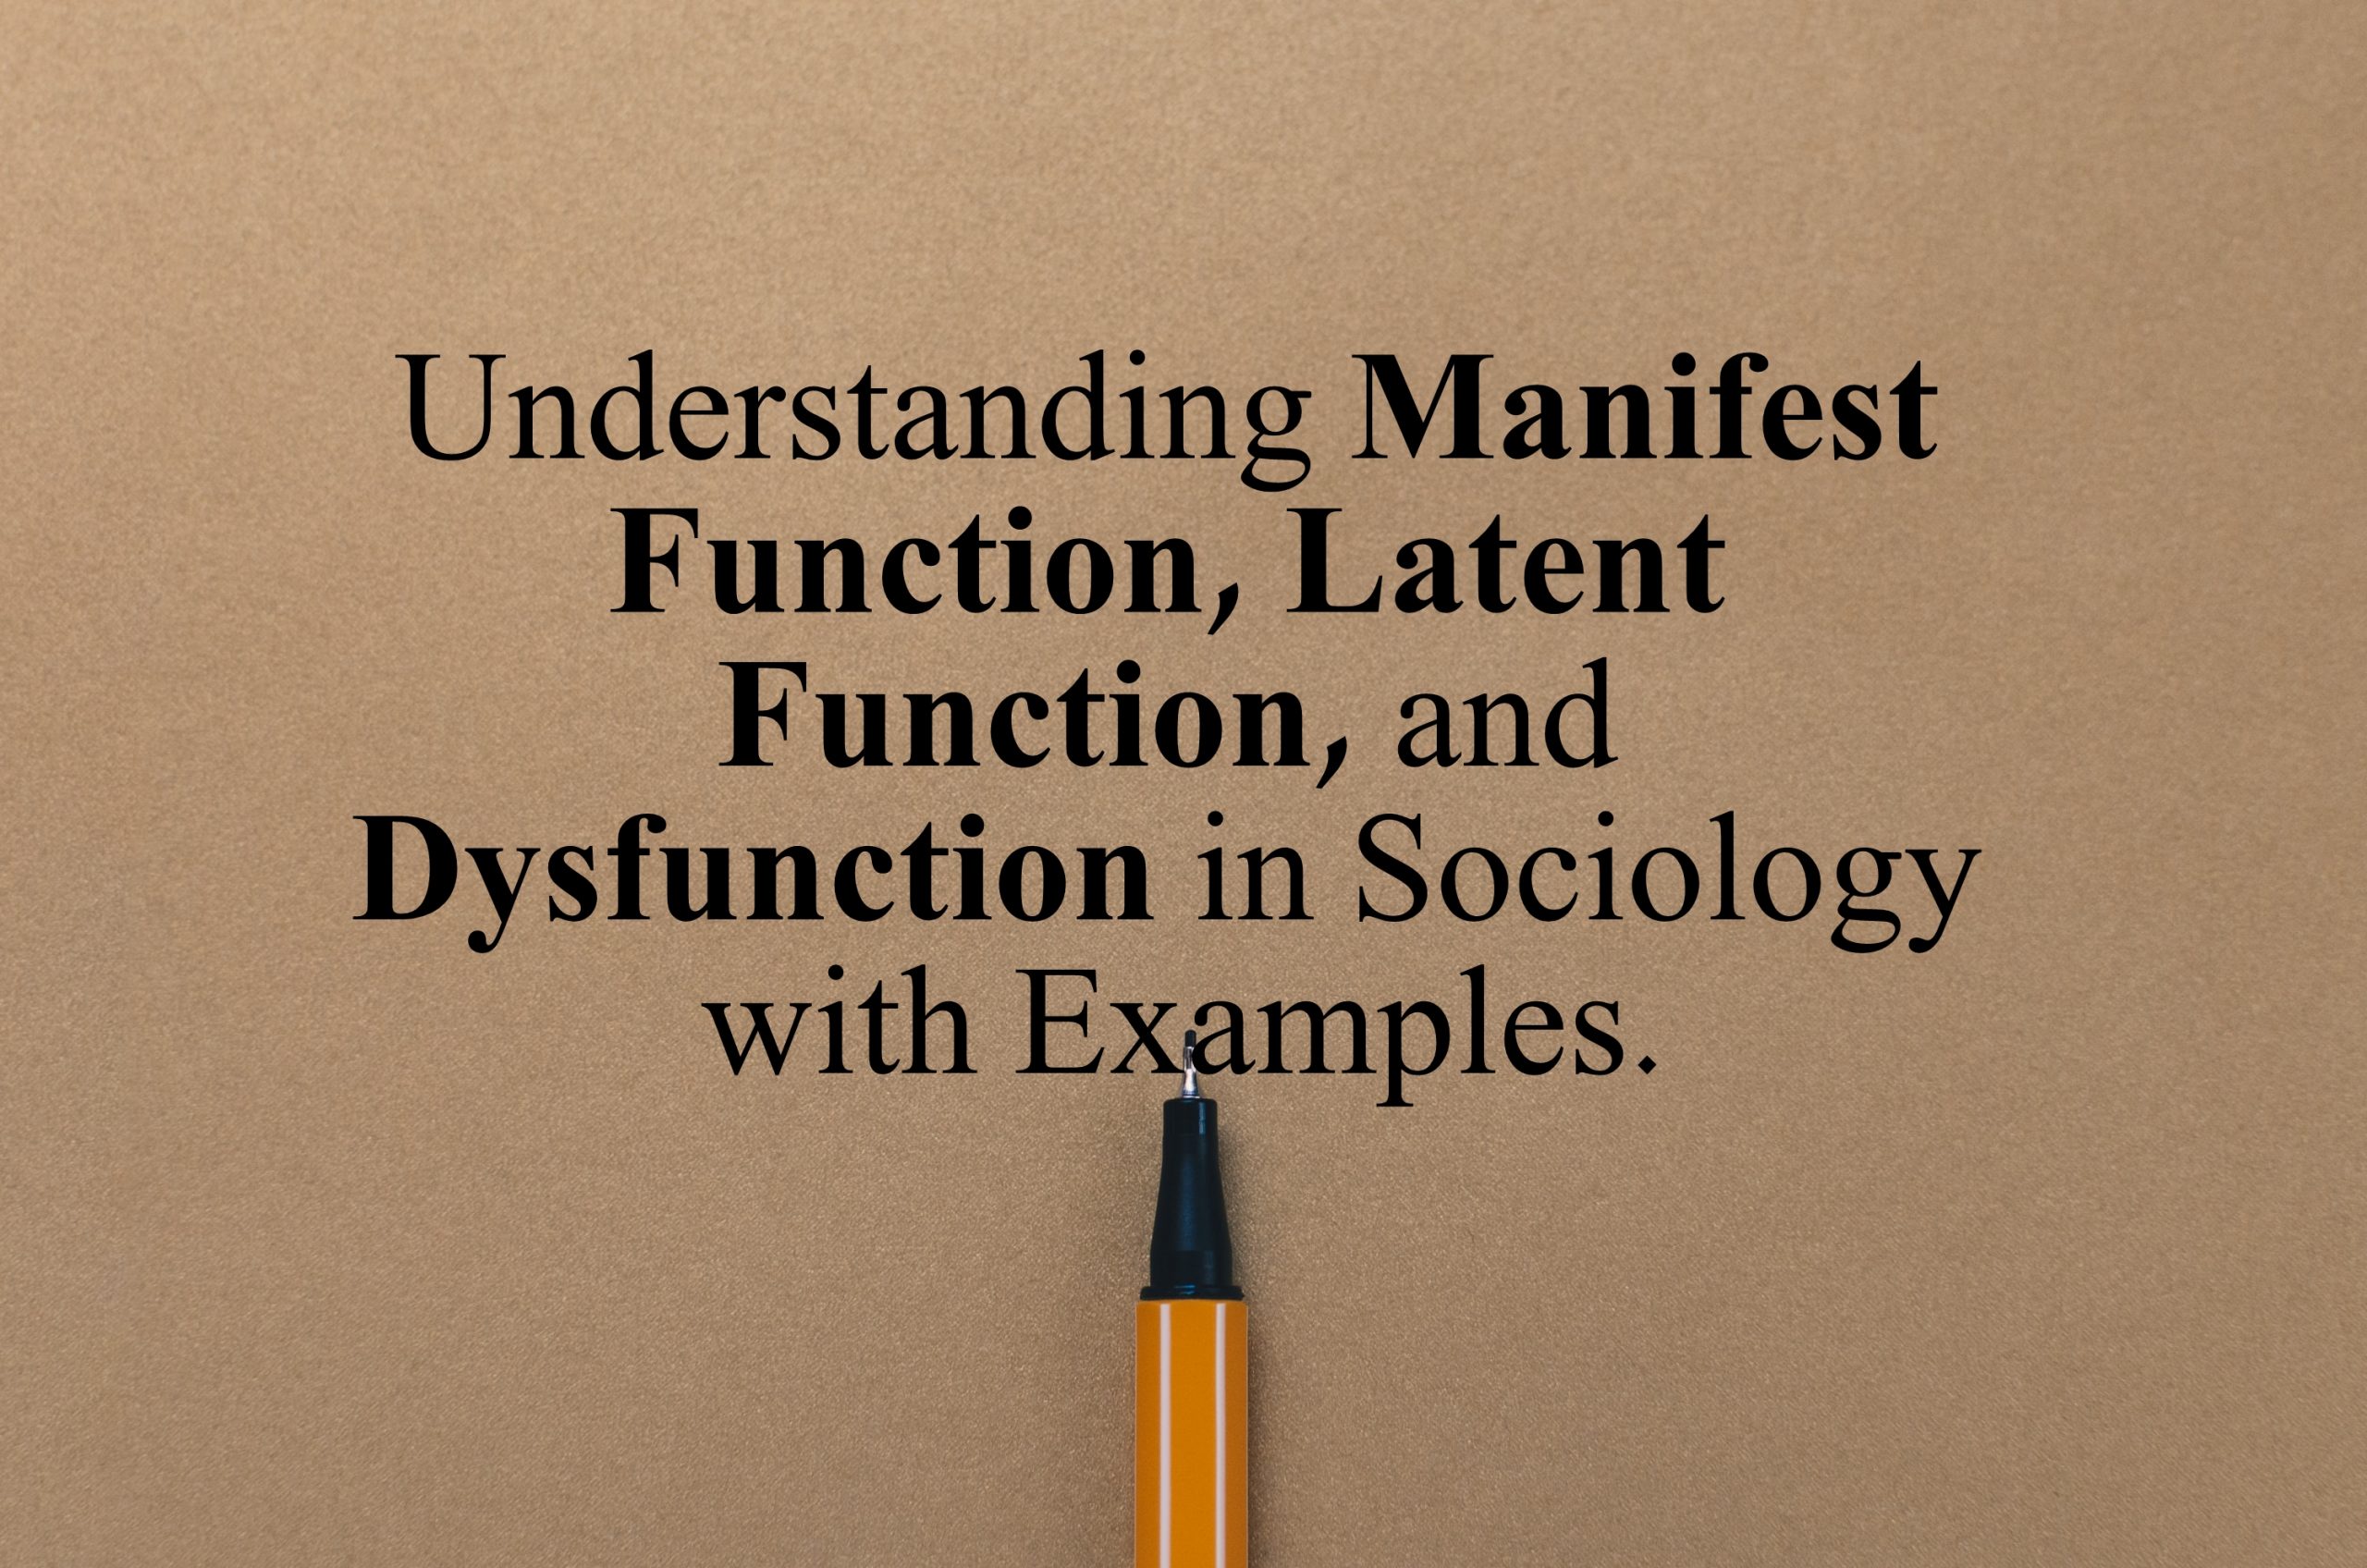 Manifest Functions, Latent Functions, Dysfunctions in Sociology